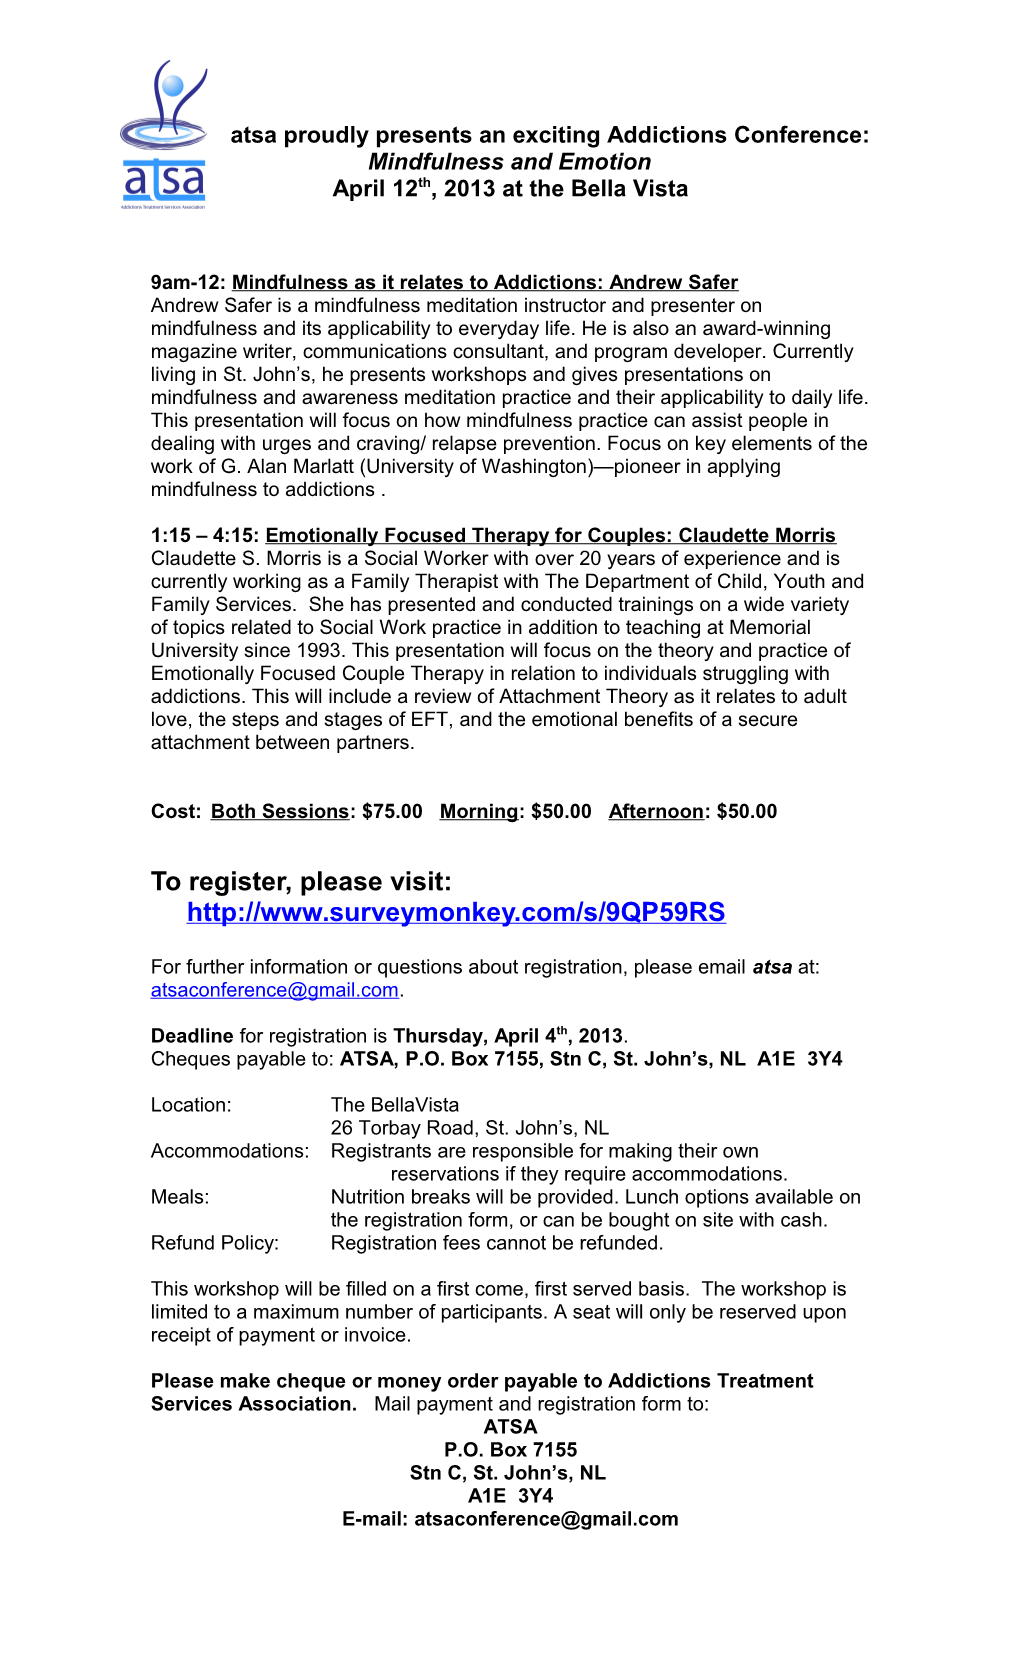 May 13, 2011: DRUG IMPAIRED DRIVING-RESPONSE and RESPONSIBILITY: IMPLICATIONS for PREVENTION